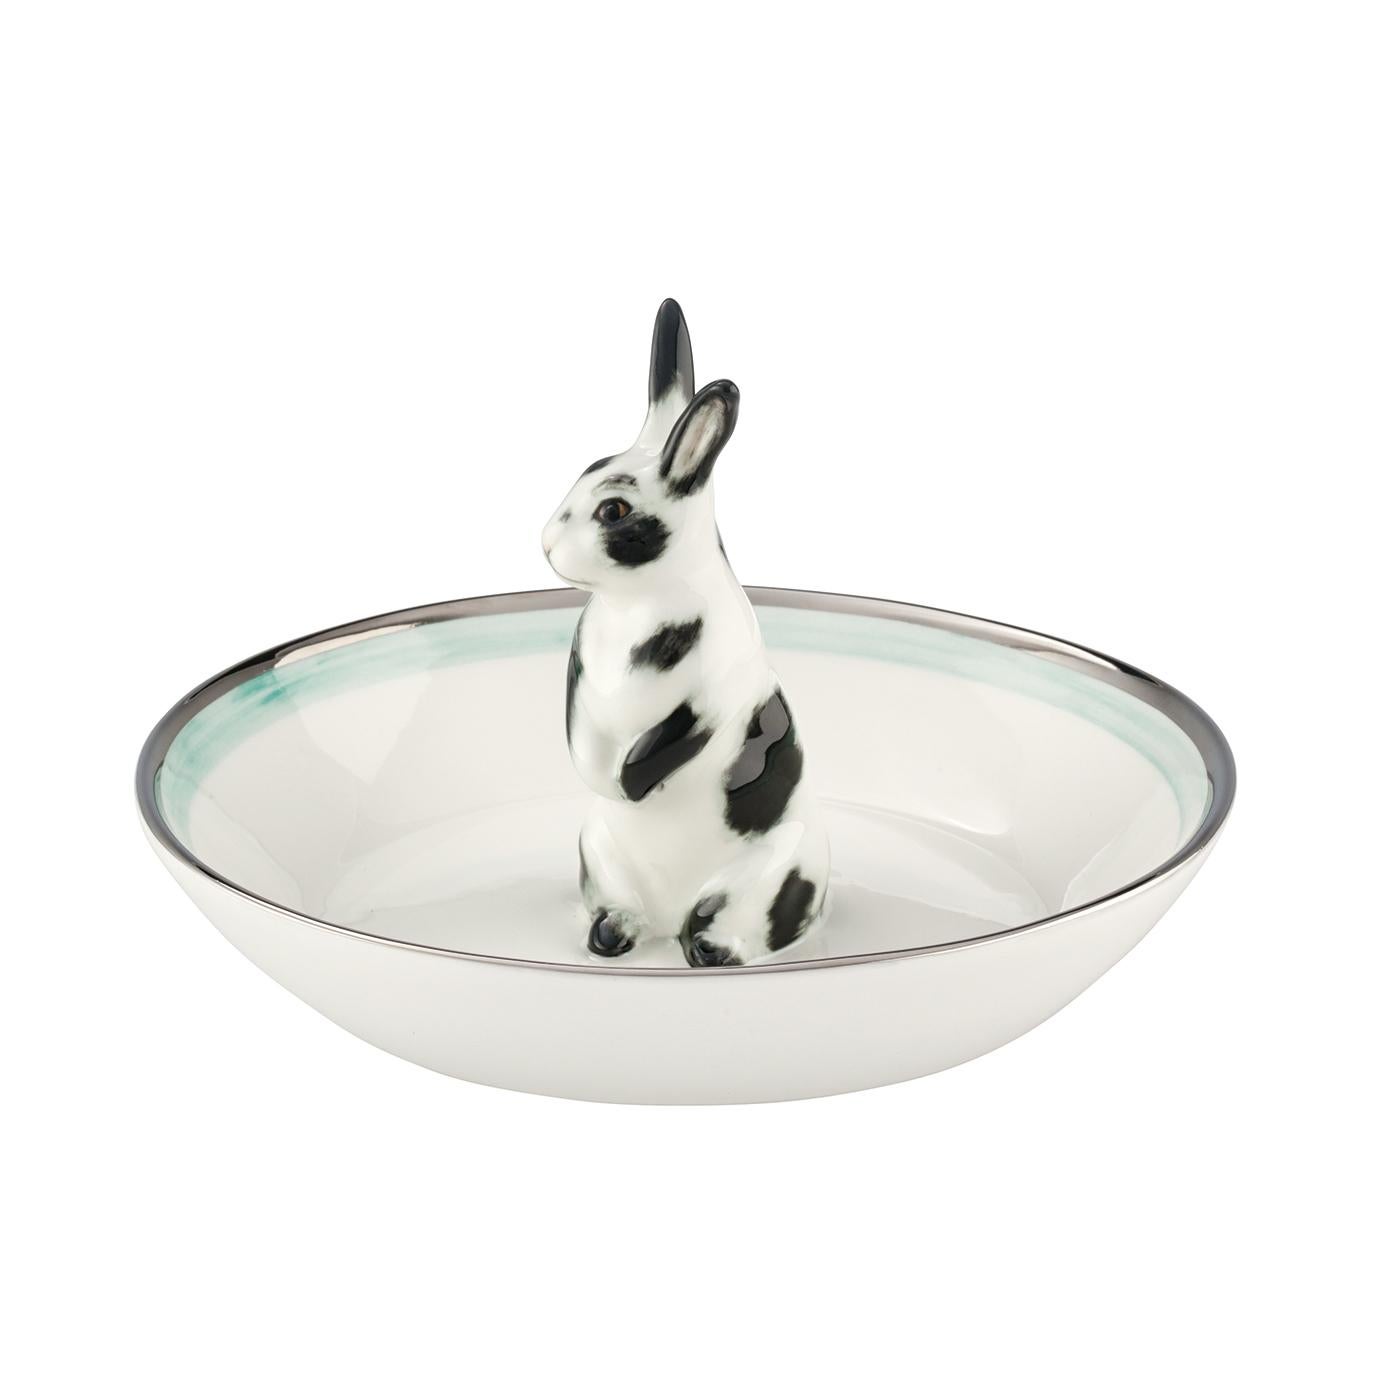 Country Style Porcelain Bowl with Hare Figure Sofina Boutique Kitzbuehel